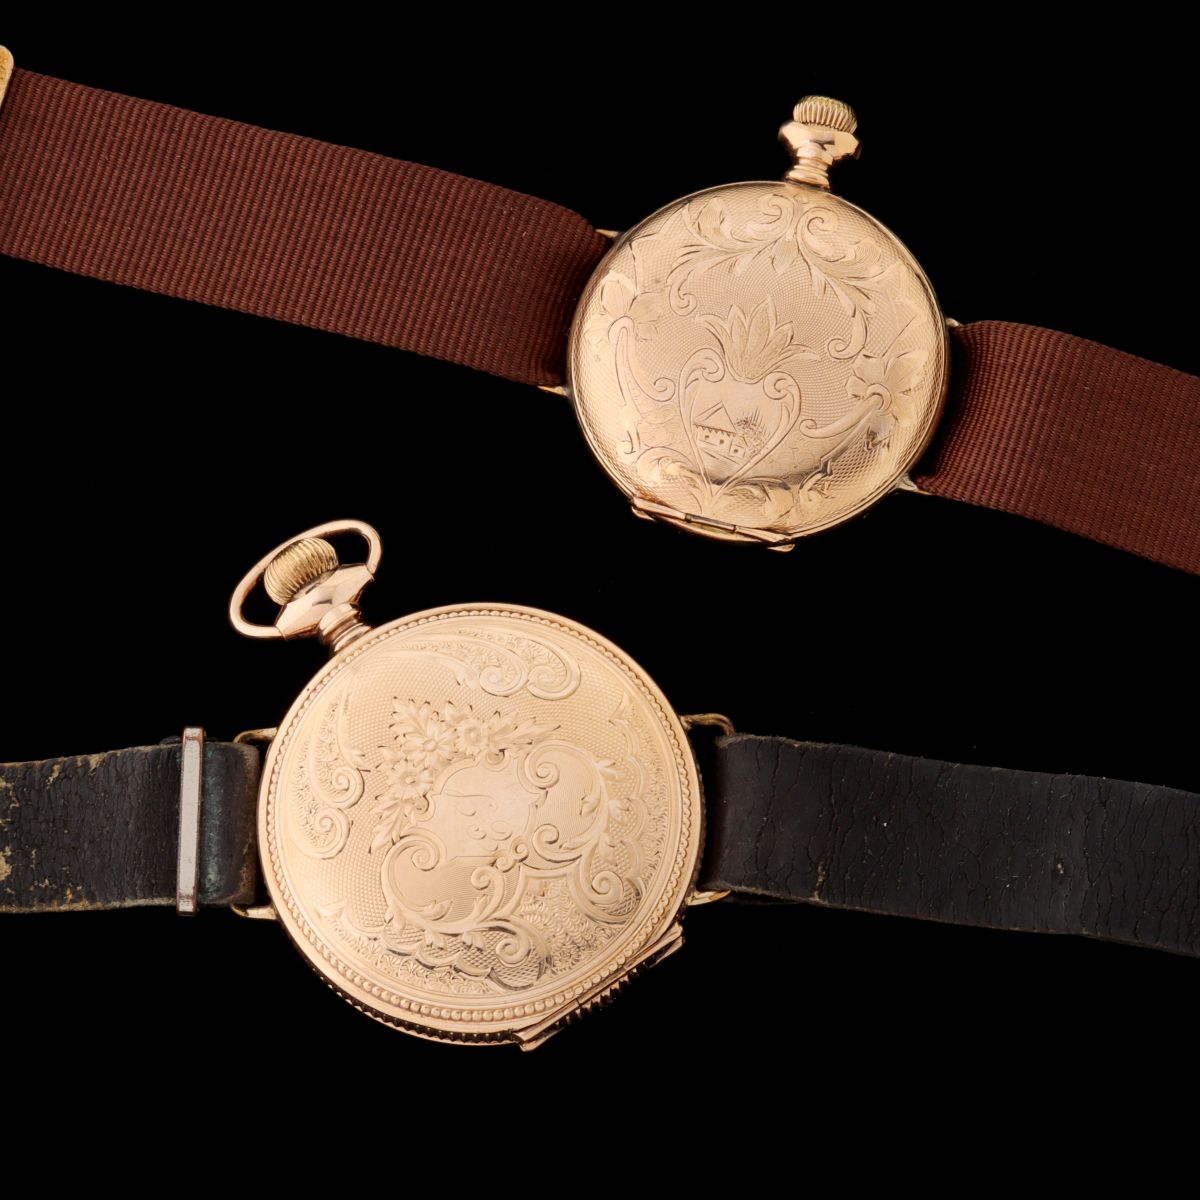 TWO EARLY 20TH C. HUNTER CASE WATCHES NOW WRIST